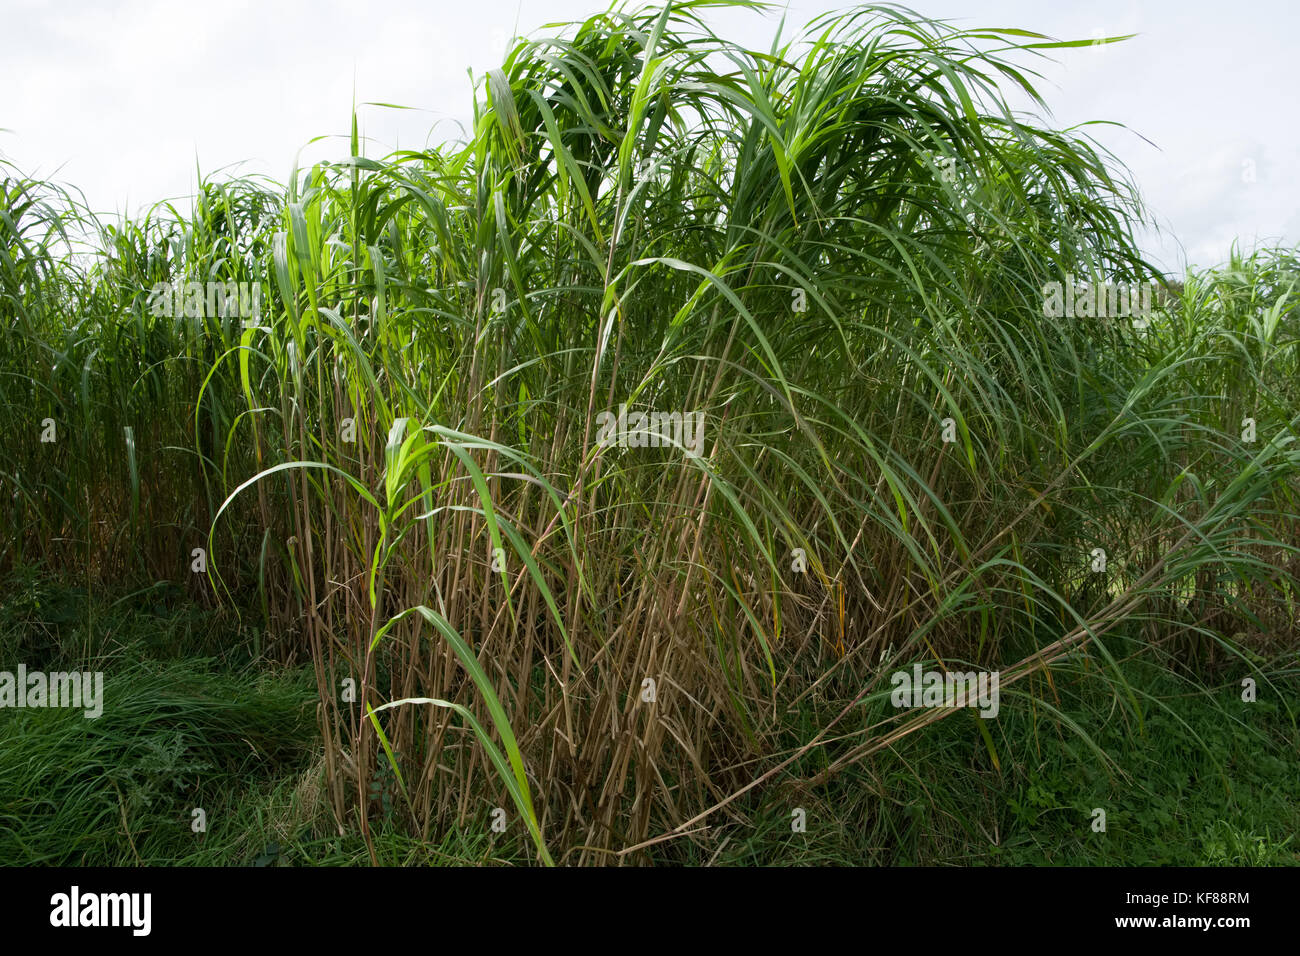 Miscanthus (commonly known as Elephant Grass) is a high yielding energy crop that grows over 3 metres tall, resembles bamboo and produces a crop every Stock Photo